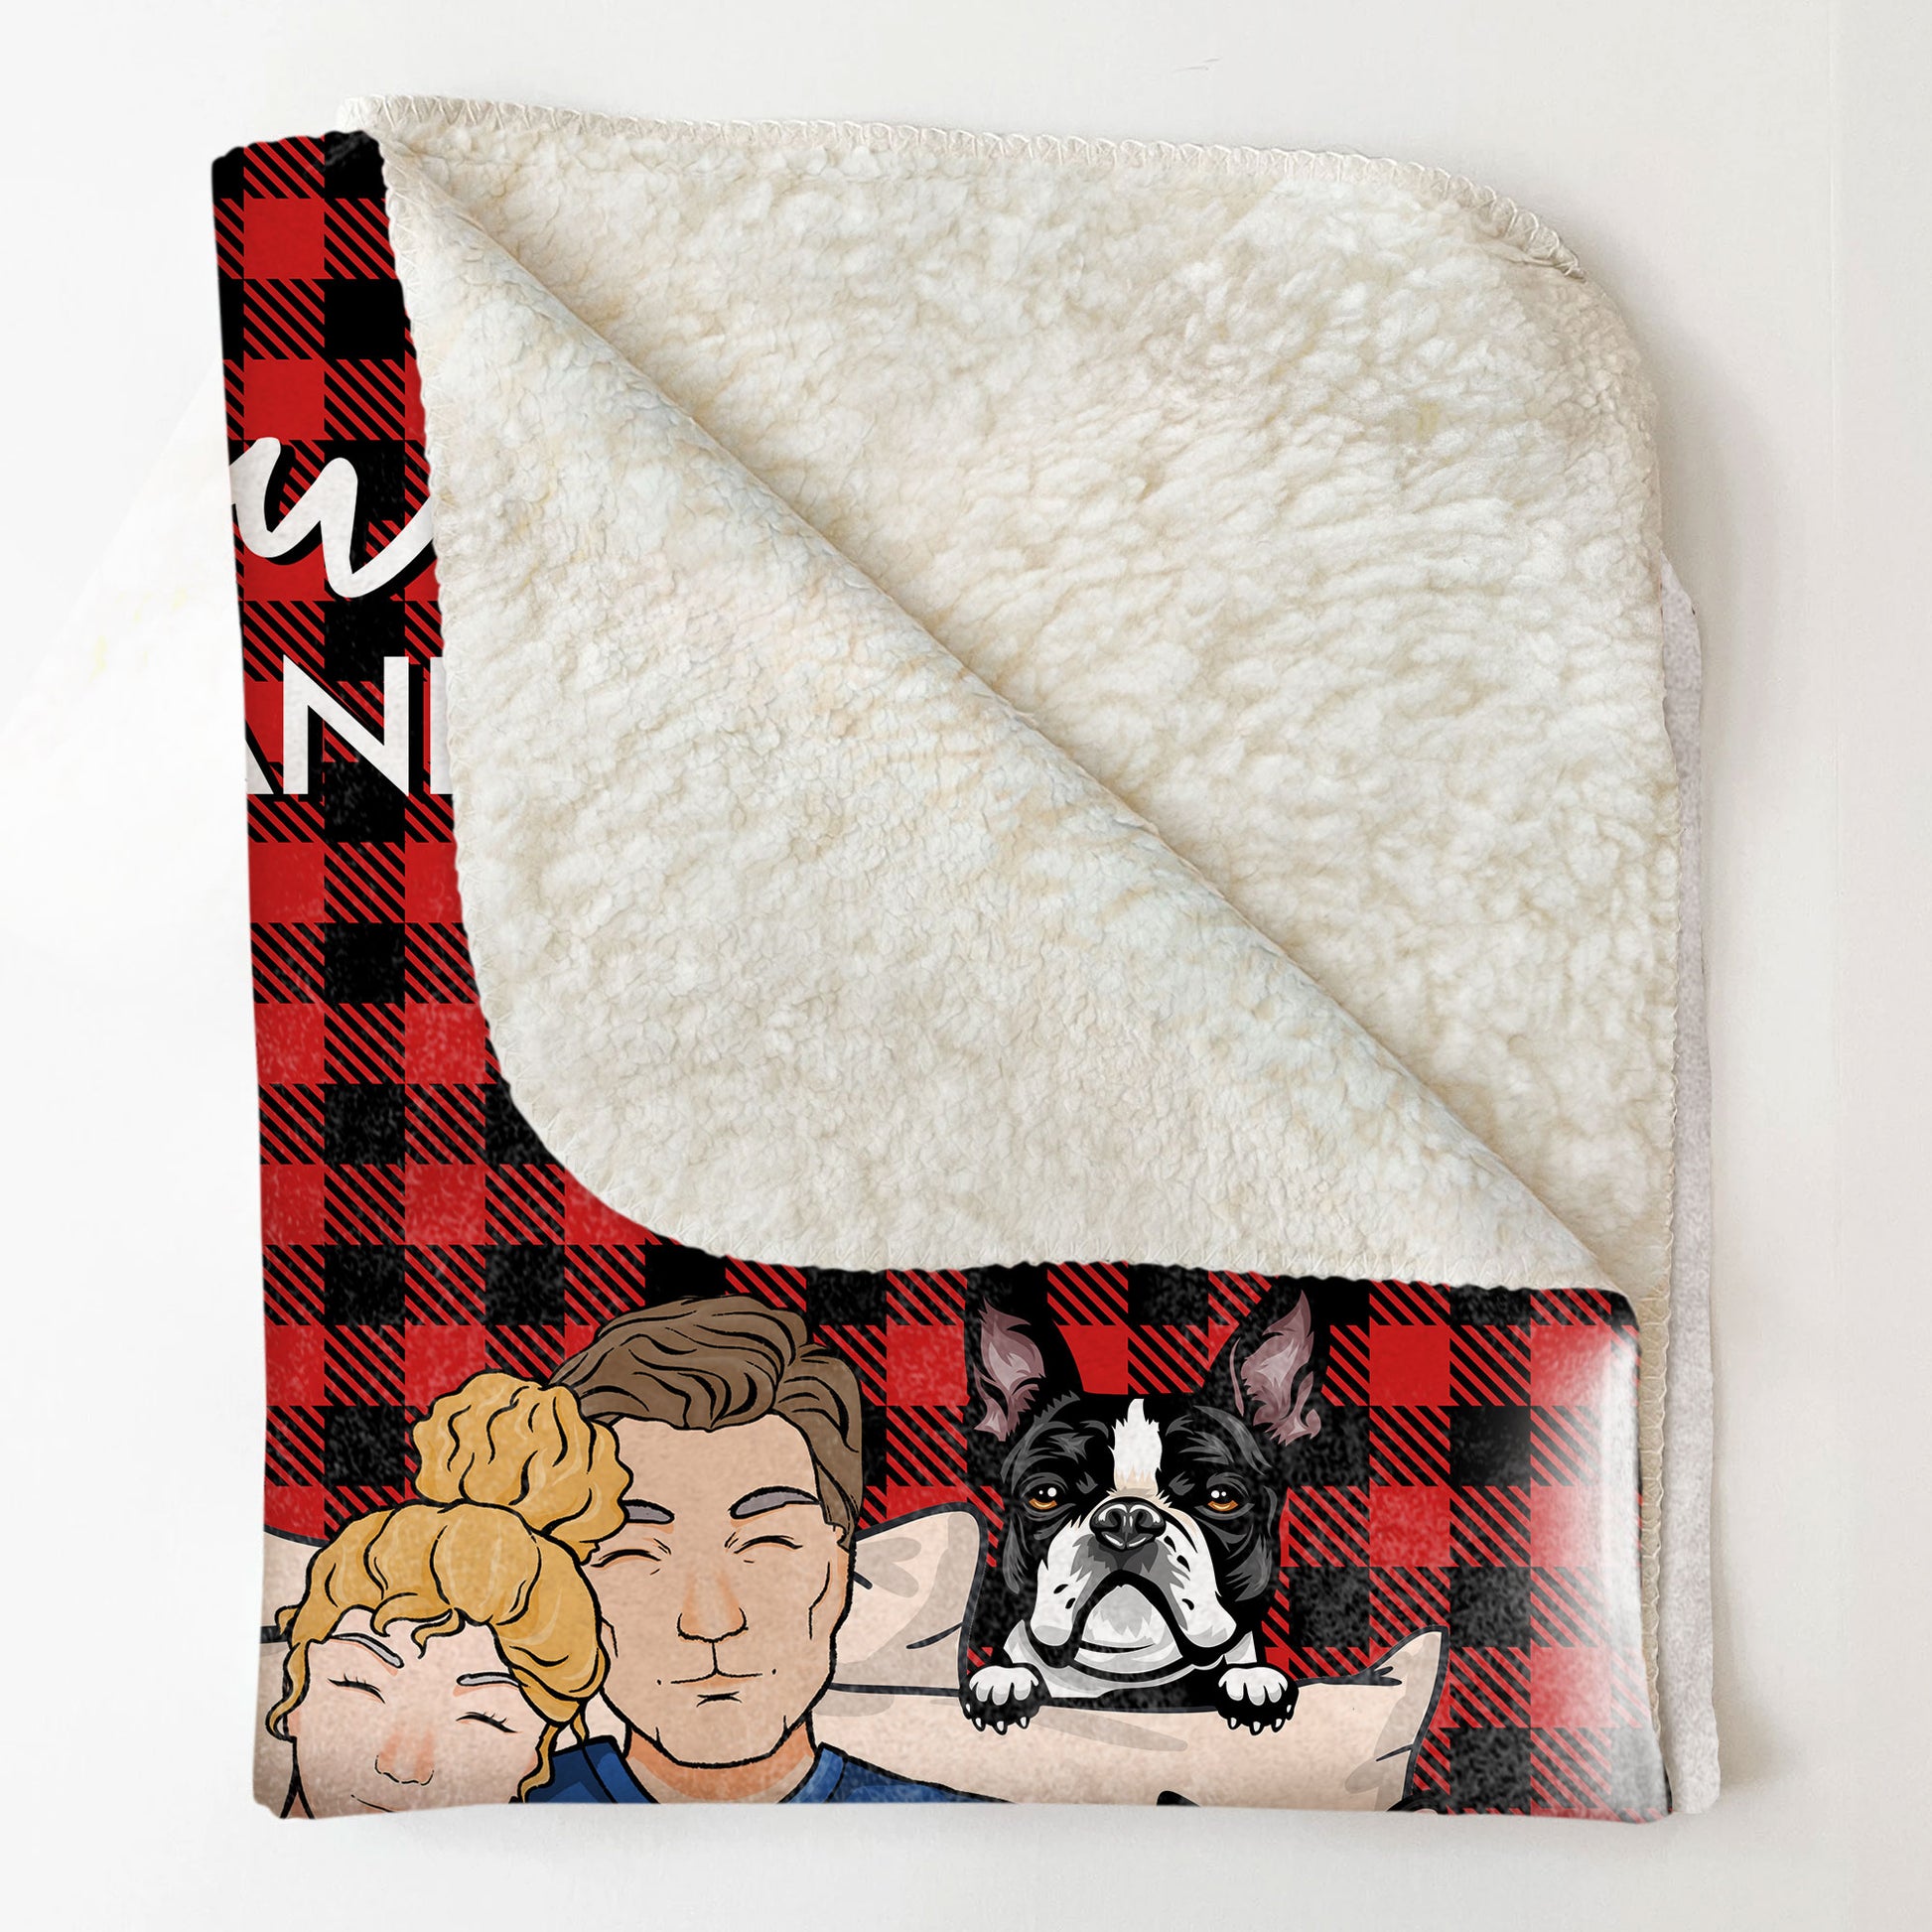 You & Me And Our Fur Babies - Personalized Blanket - Birthday, Anniversary, Loving Gift For Husband, Wife, Couples, Dog & Cat Lovers